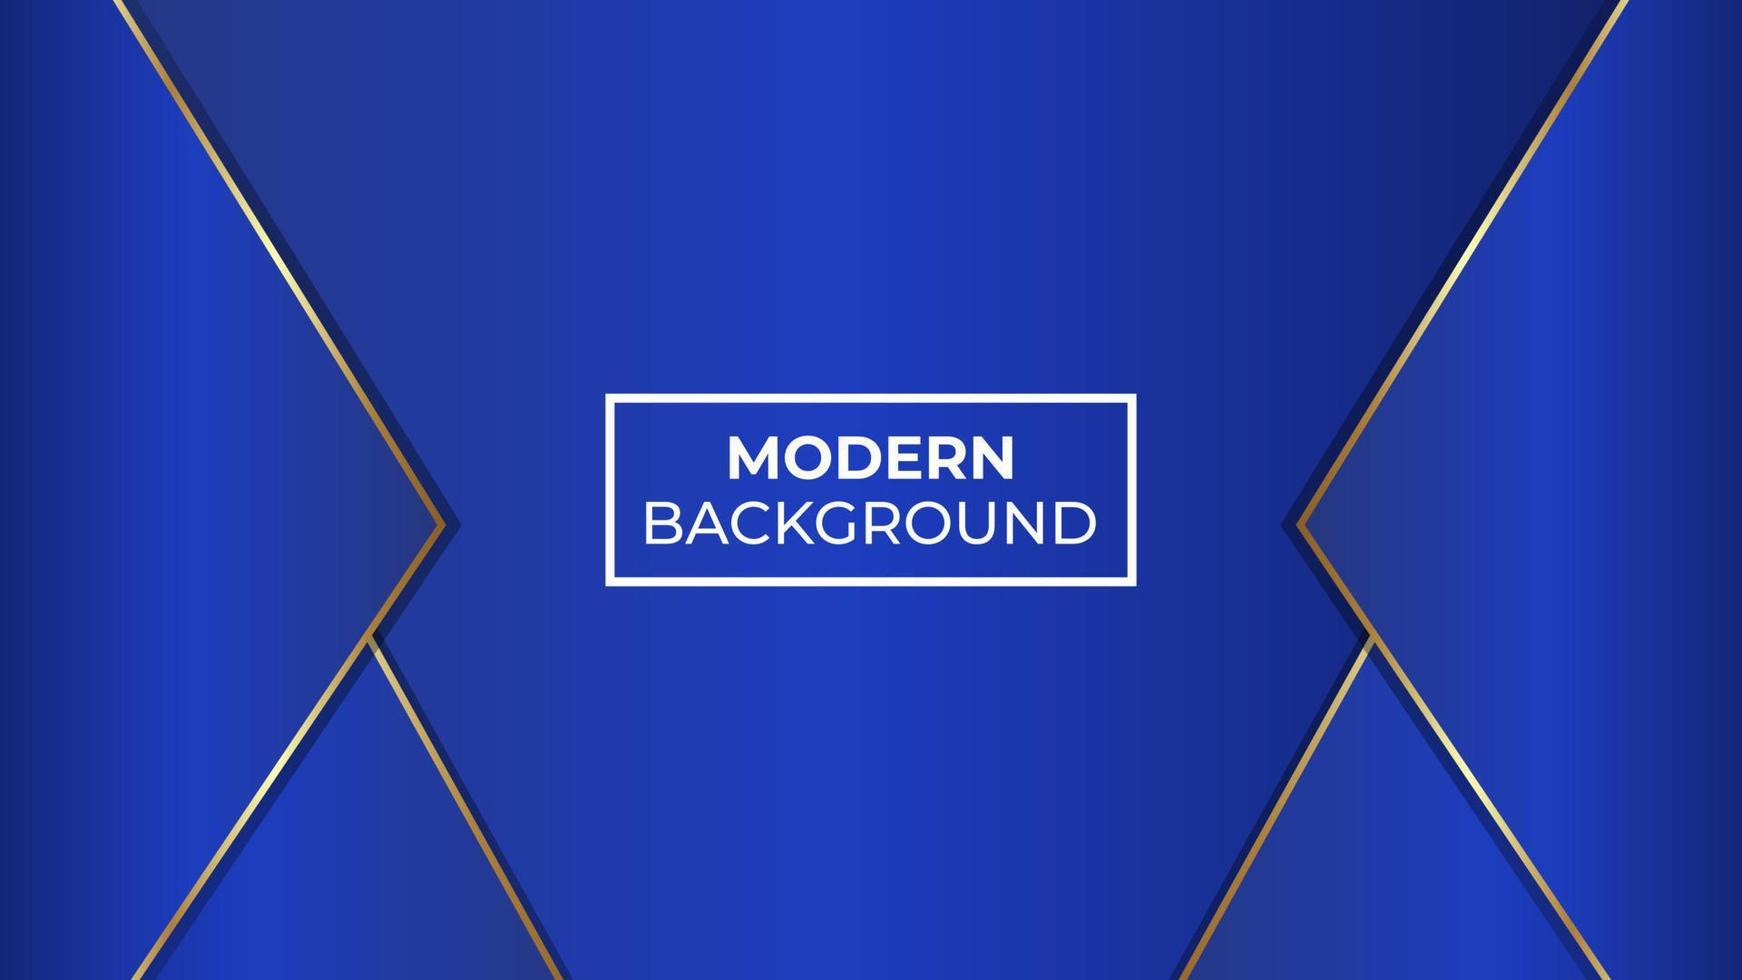 Modern background in dark blue and light blue with a gold border with a stack of two triangles, easy to edit vector